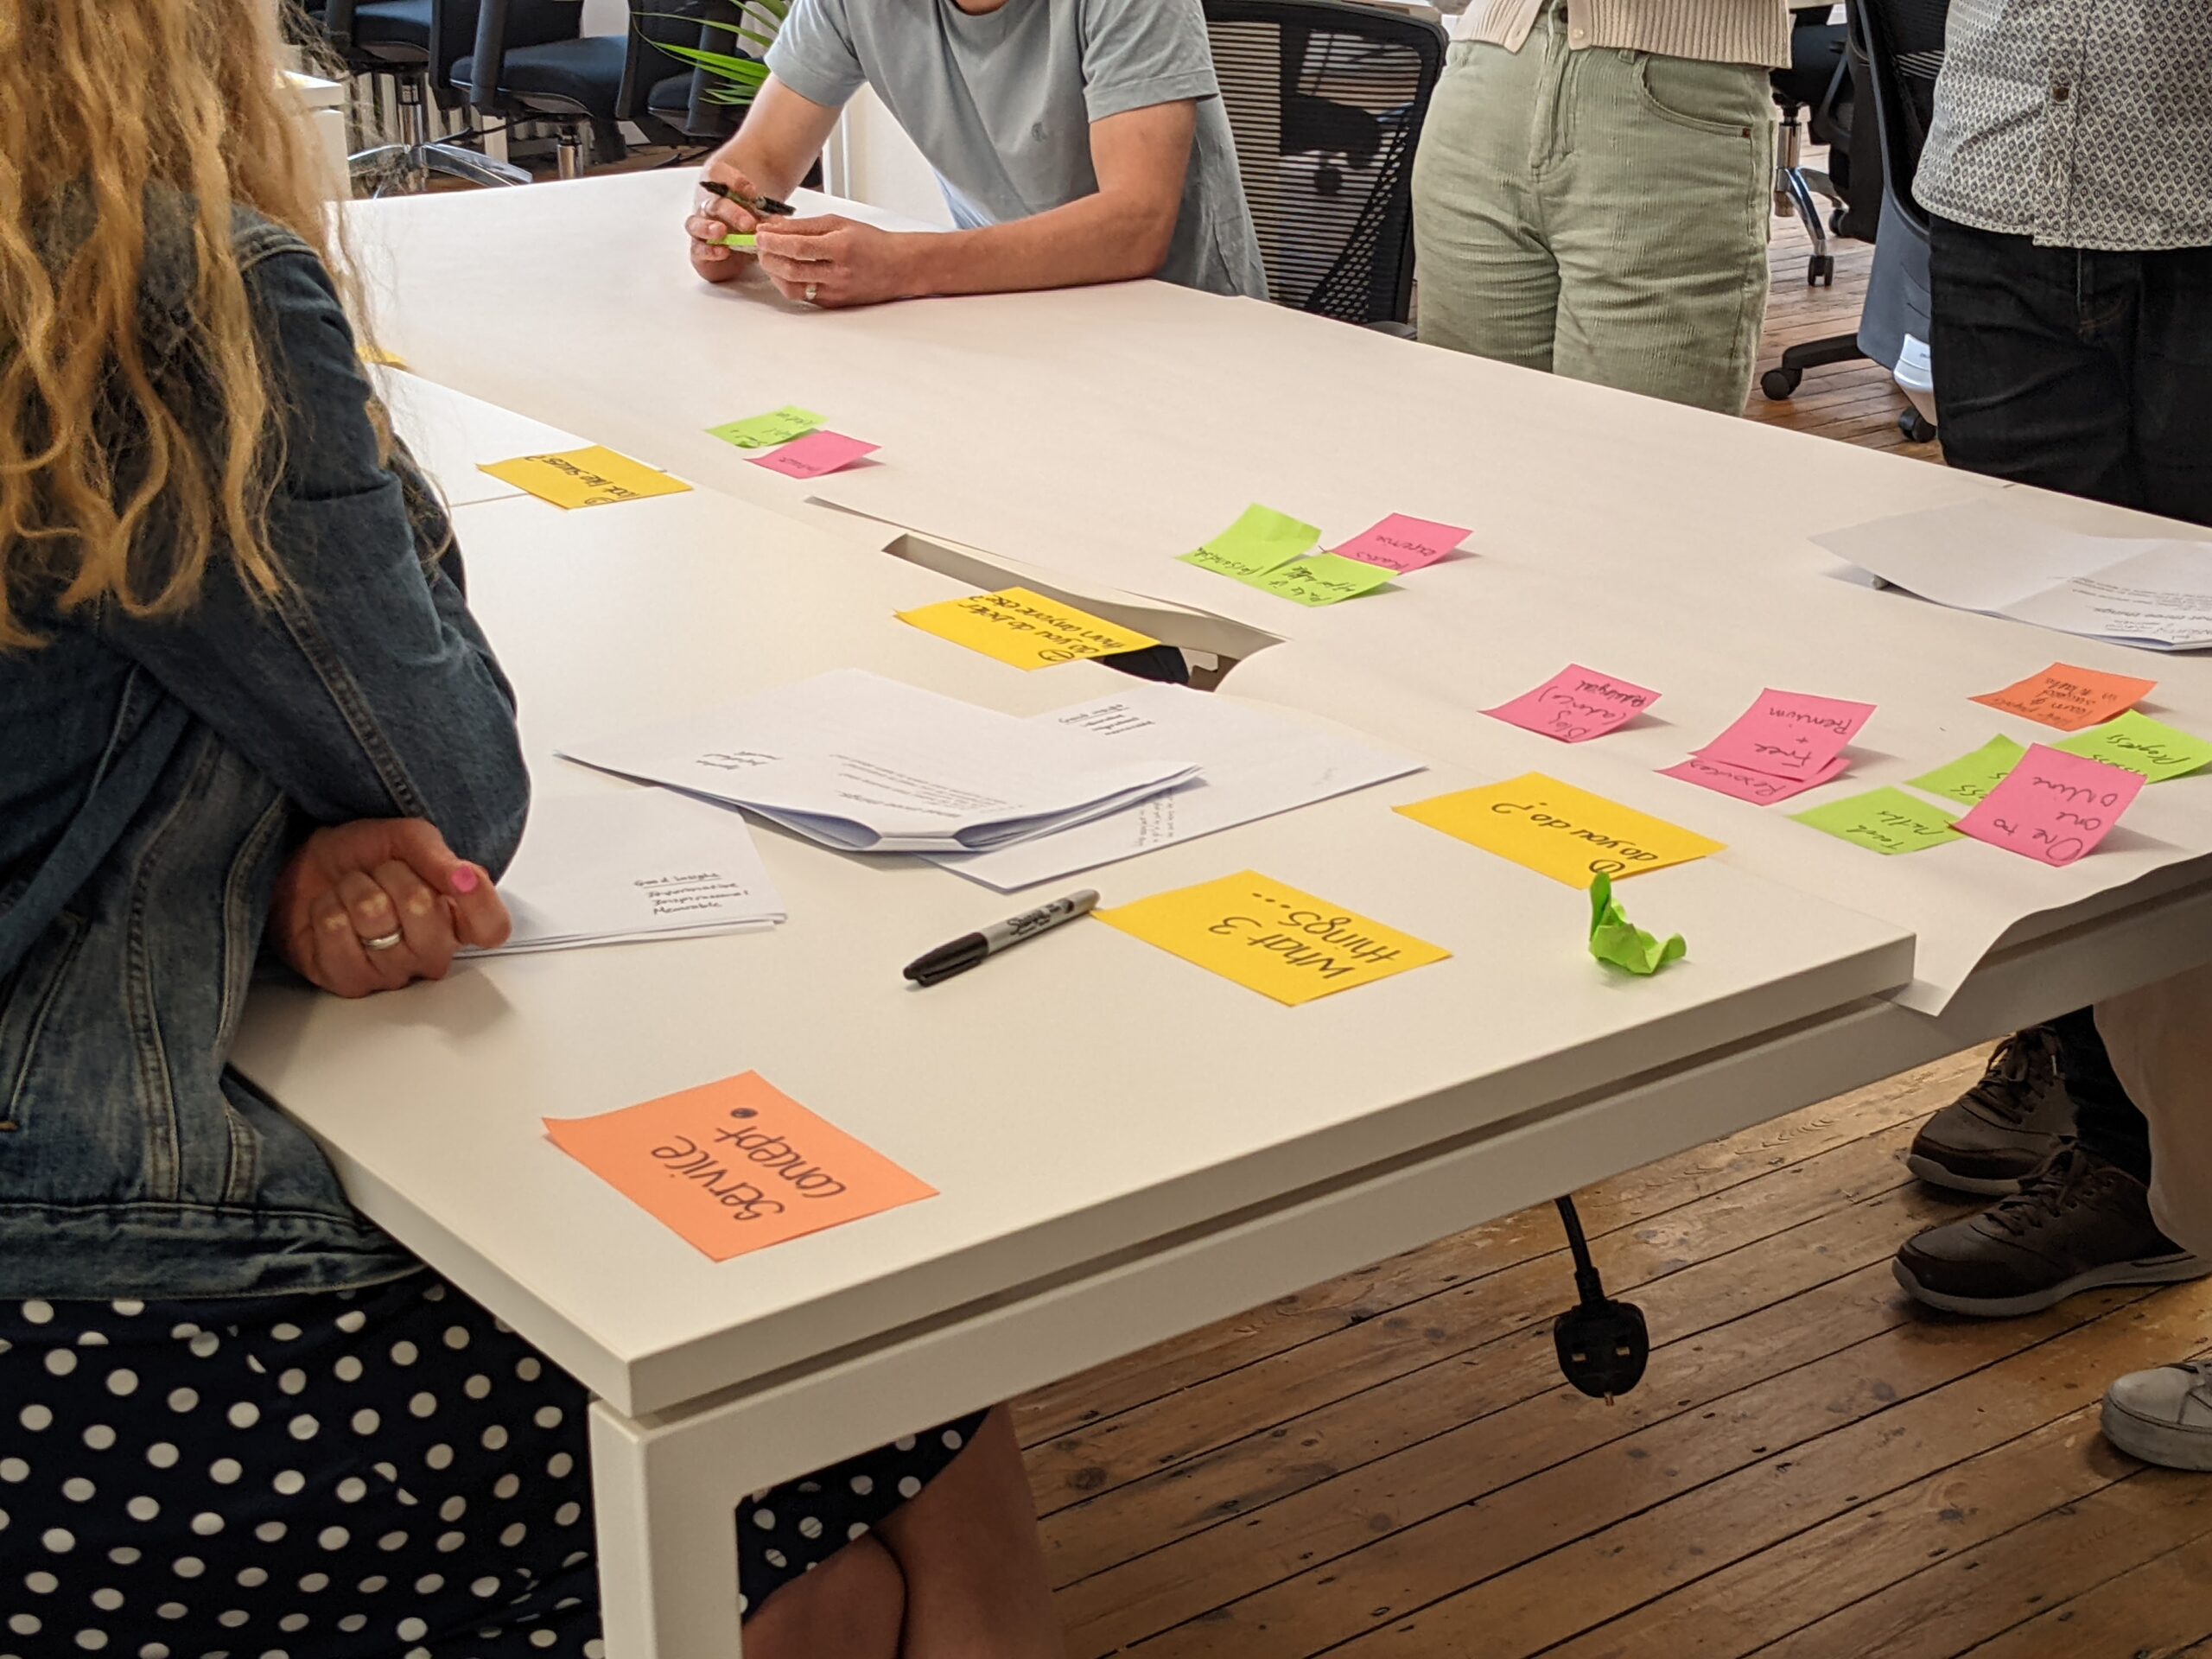 People gathered around a table with colourful sticky notes on it